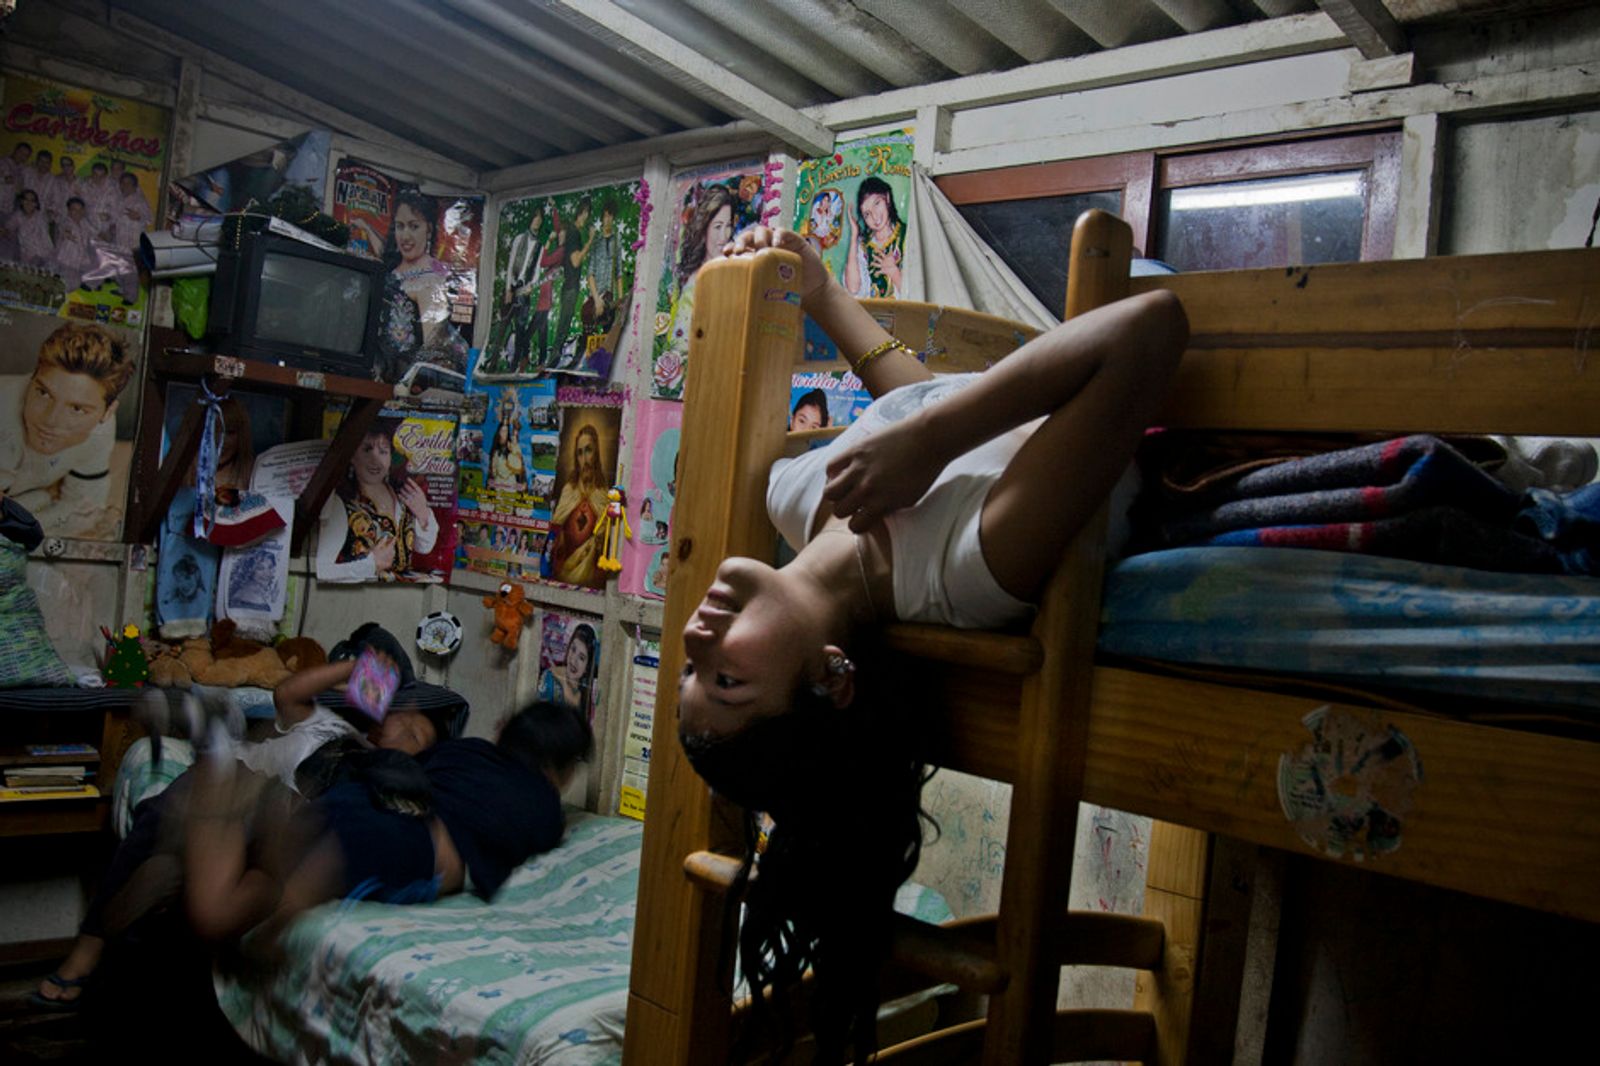 © Max Cabello Orcasitas - Flor Romero rests in his room after a concert.